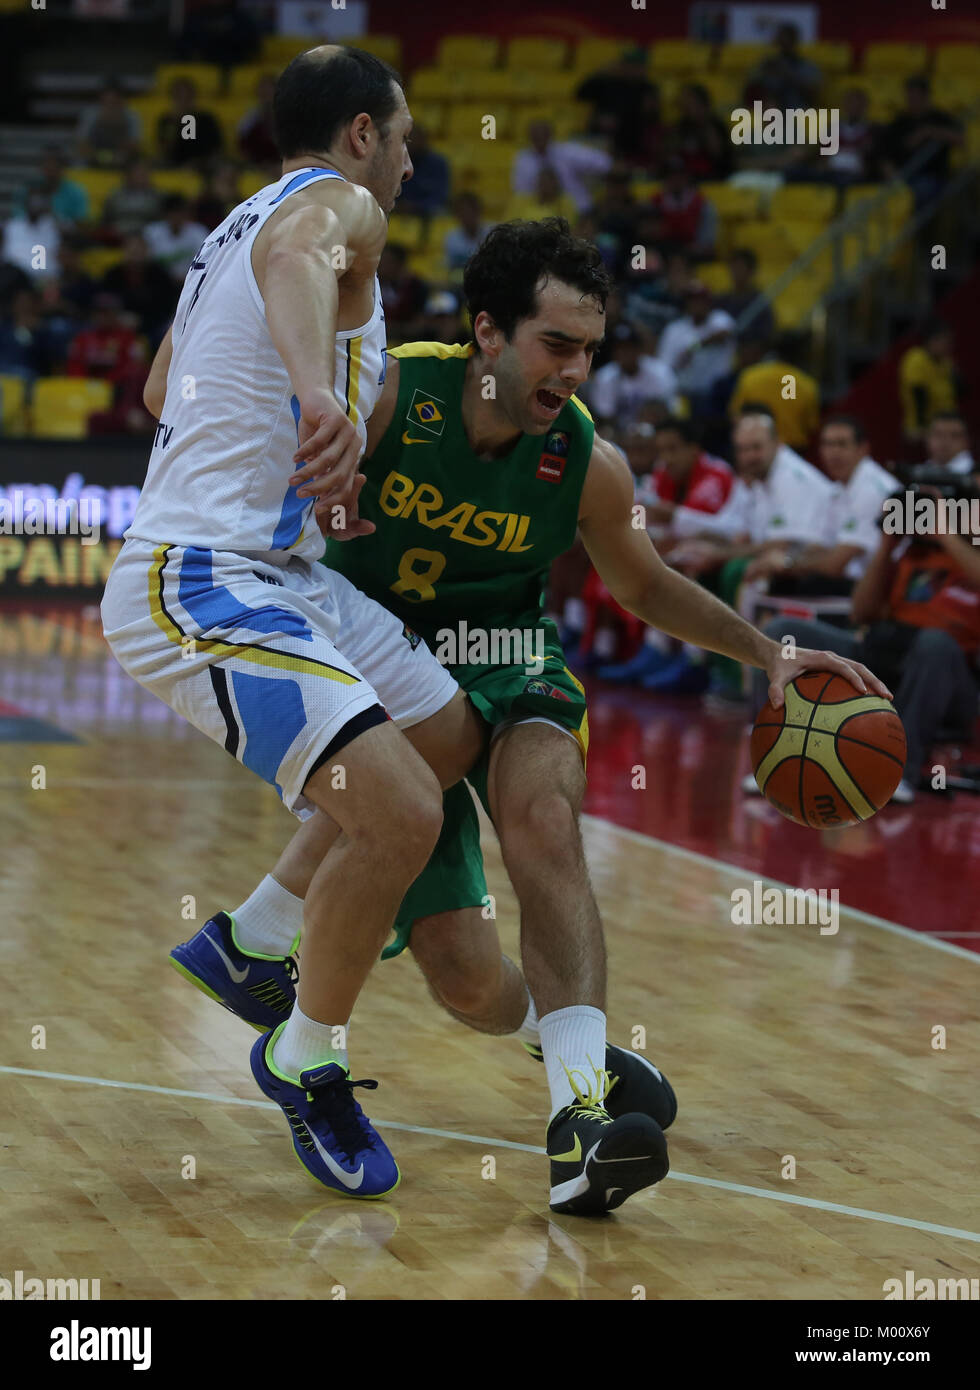 Caracas, Distrito Capital, Venezuela. 2nd Sep, 2013. September 01, 2013. The player Vitor Benitez (d), from Brazil, disputes the ball with Nicol''¡s Mazzarino (i), from Uruguay, during the match of the first phase of the FIBA Americas Basketball pre World Cup 2013, in Caracas, Venezuela. Photo: Juan Carlos Hernandez Credit: Juan Carlos Hernandez/ZUMA Wire/Alamy Live News Stock Photo